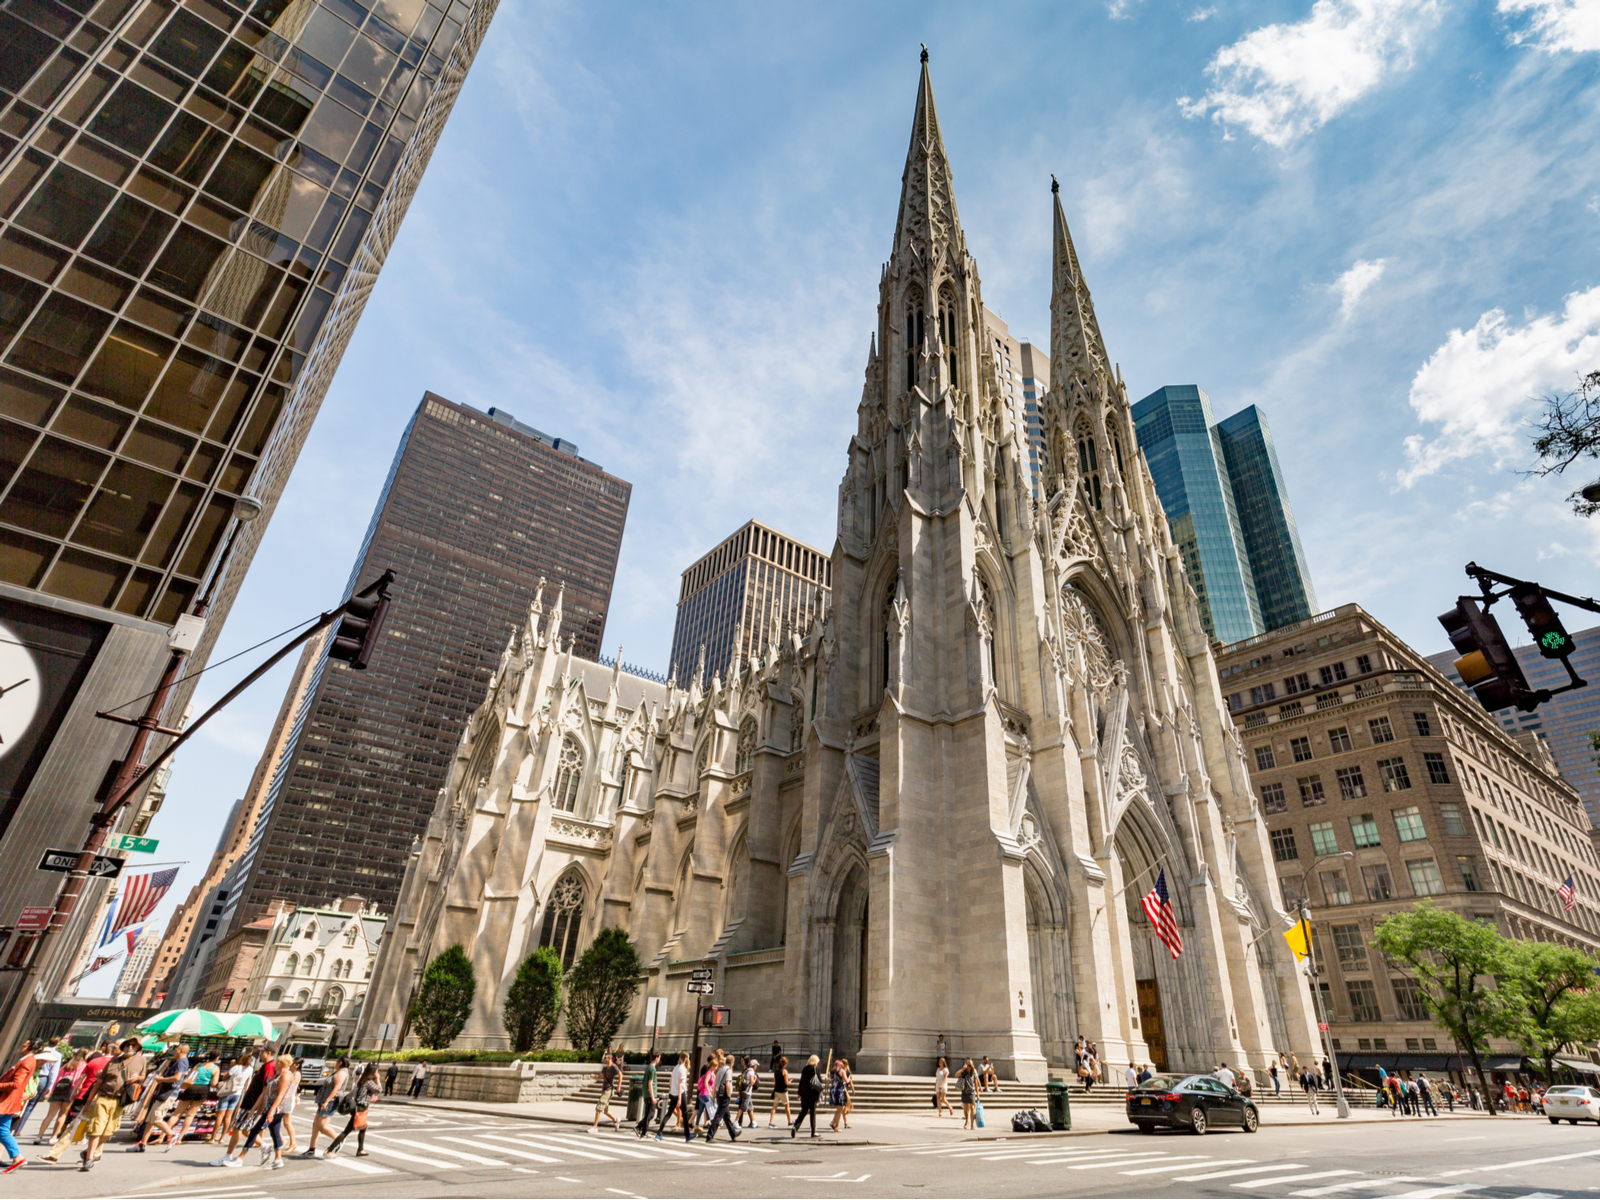 Patrick's Cathedral, a top pick for the best things to do in NYC, as viewed from the street